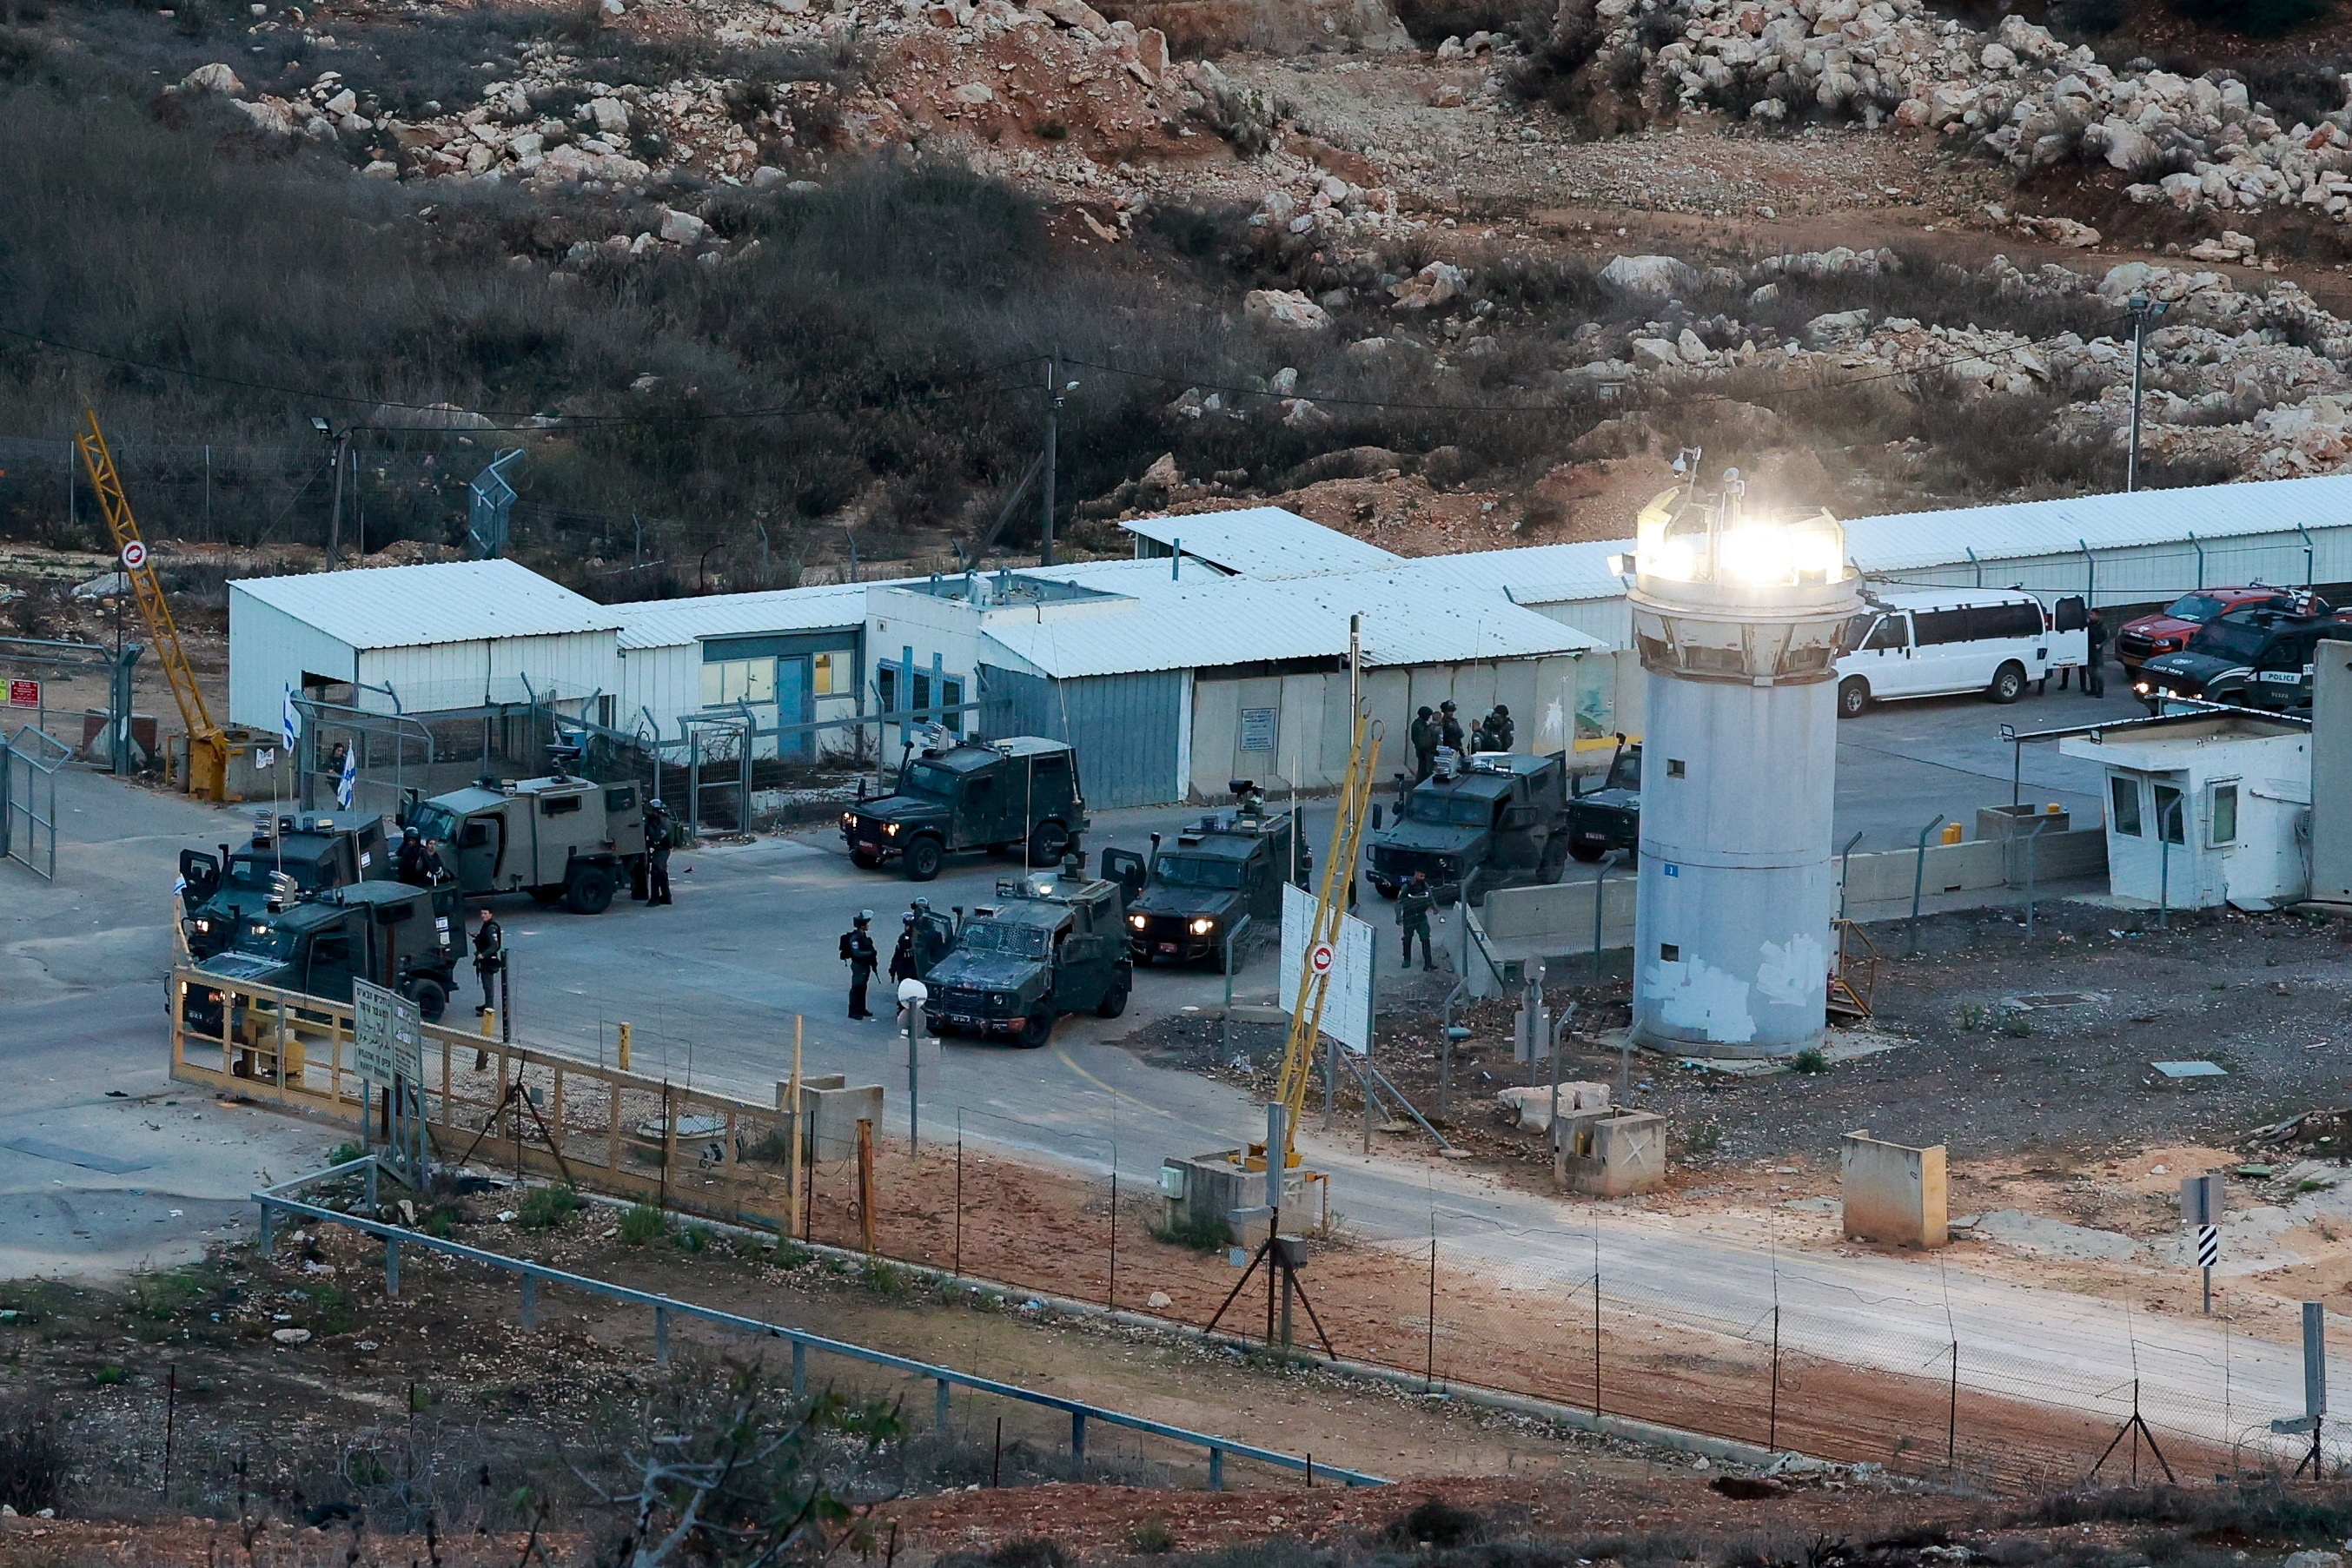 The Israeli military prison, Ofer, near Ramallah, in the West Bank, where some Palestinian prisoners are expected to be released. /Ammar Awad/Reuters